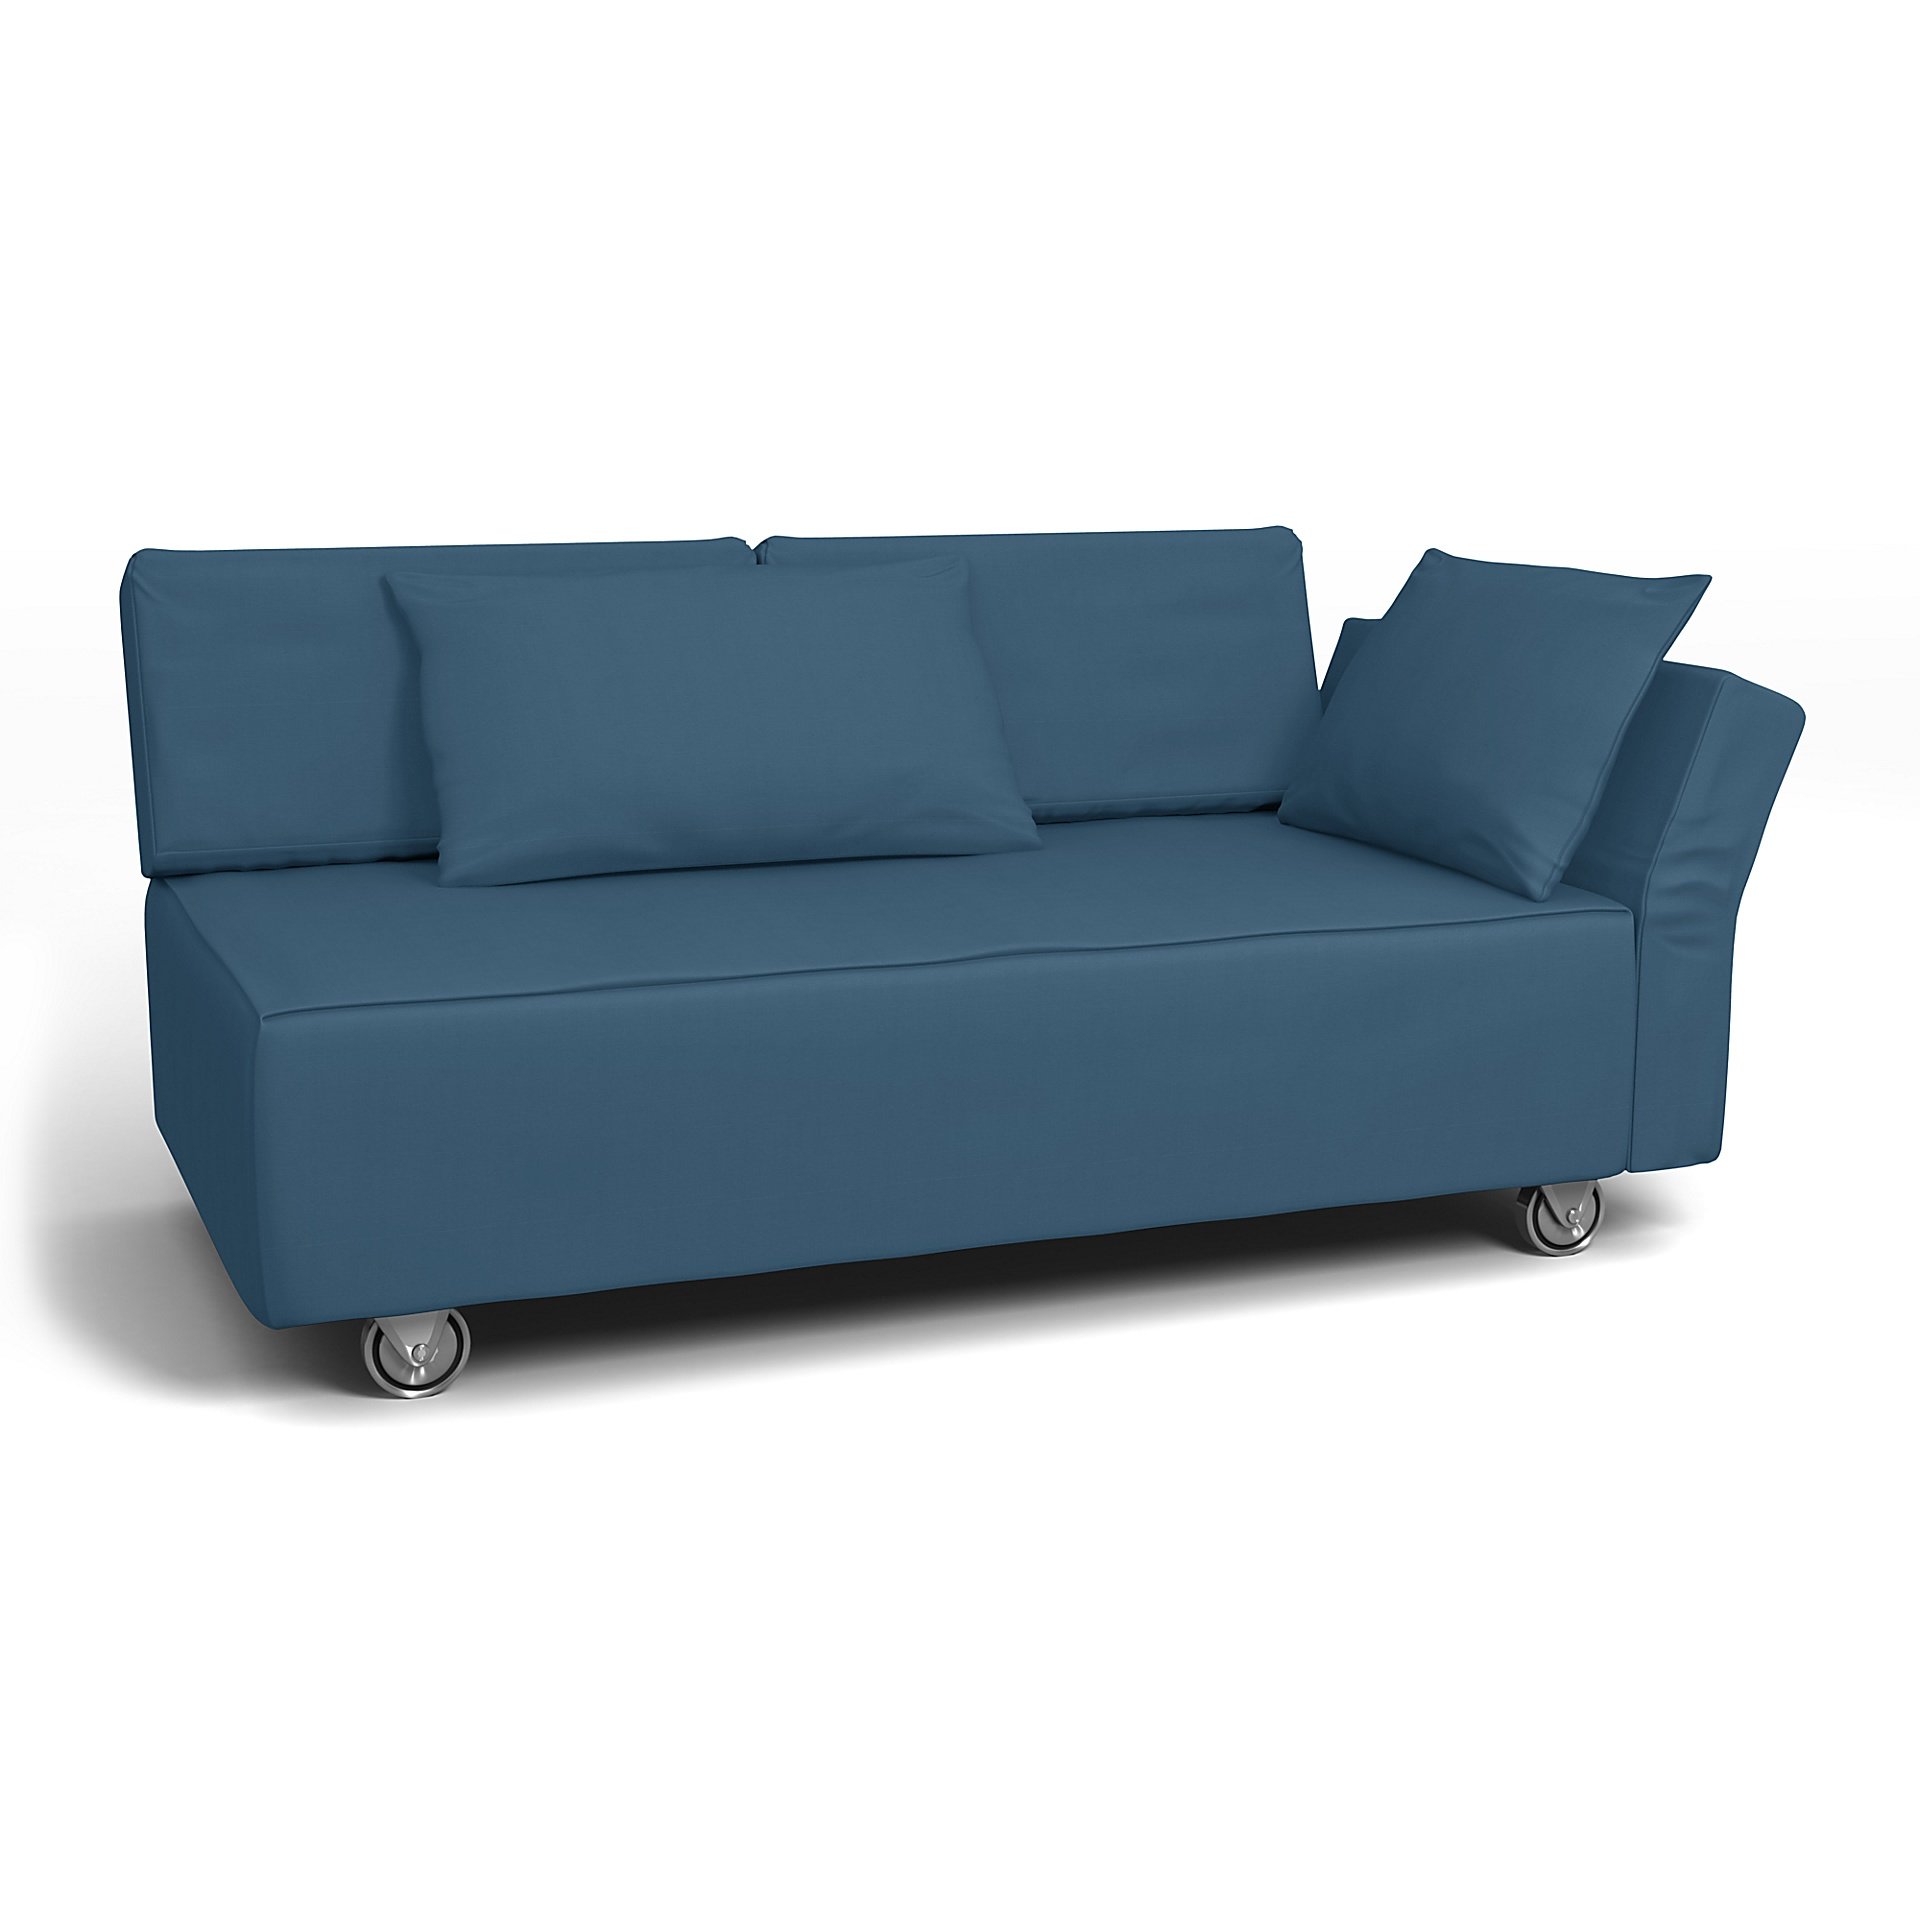 IKEA - Falsterbo 2 Seat Sofa with Right Arm Cover, Real Teal, Cotton - Bemz